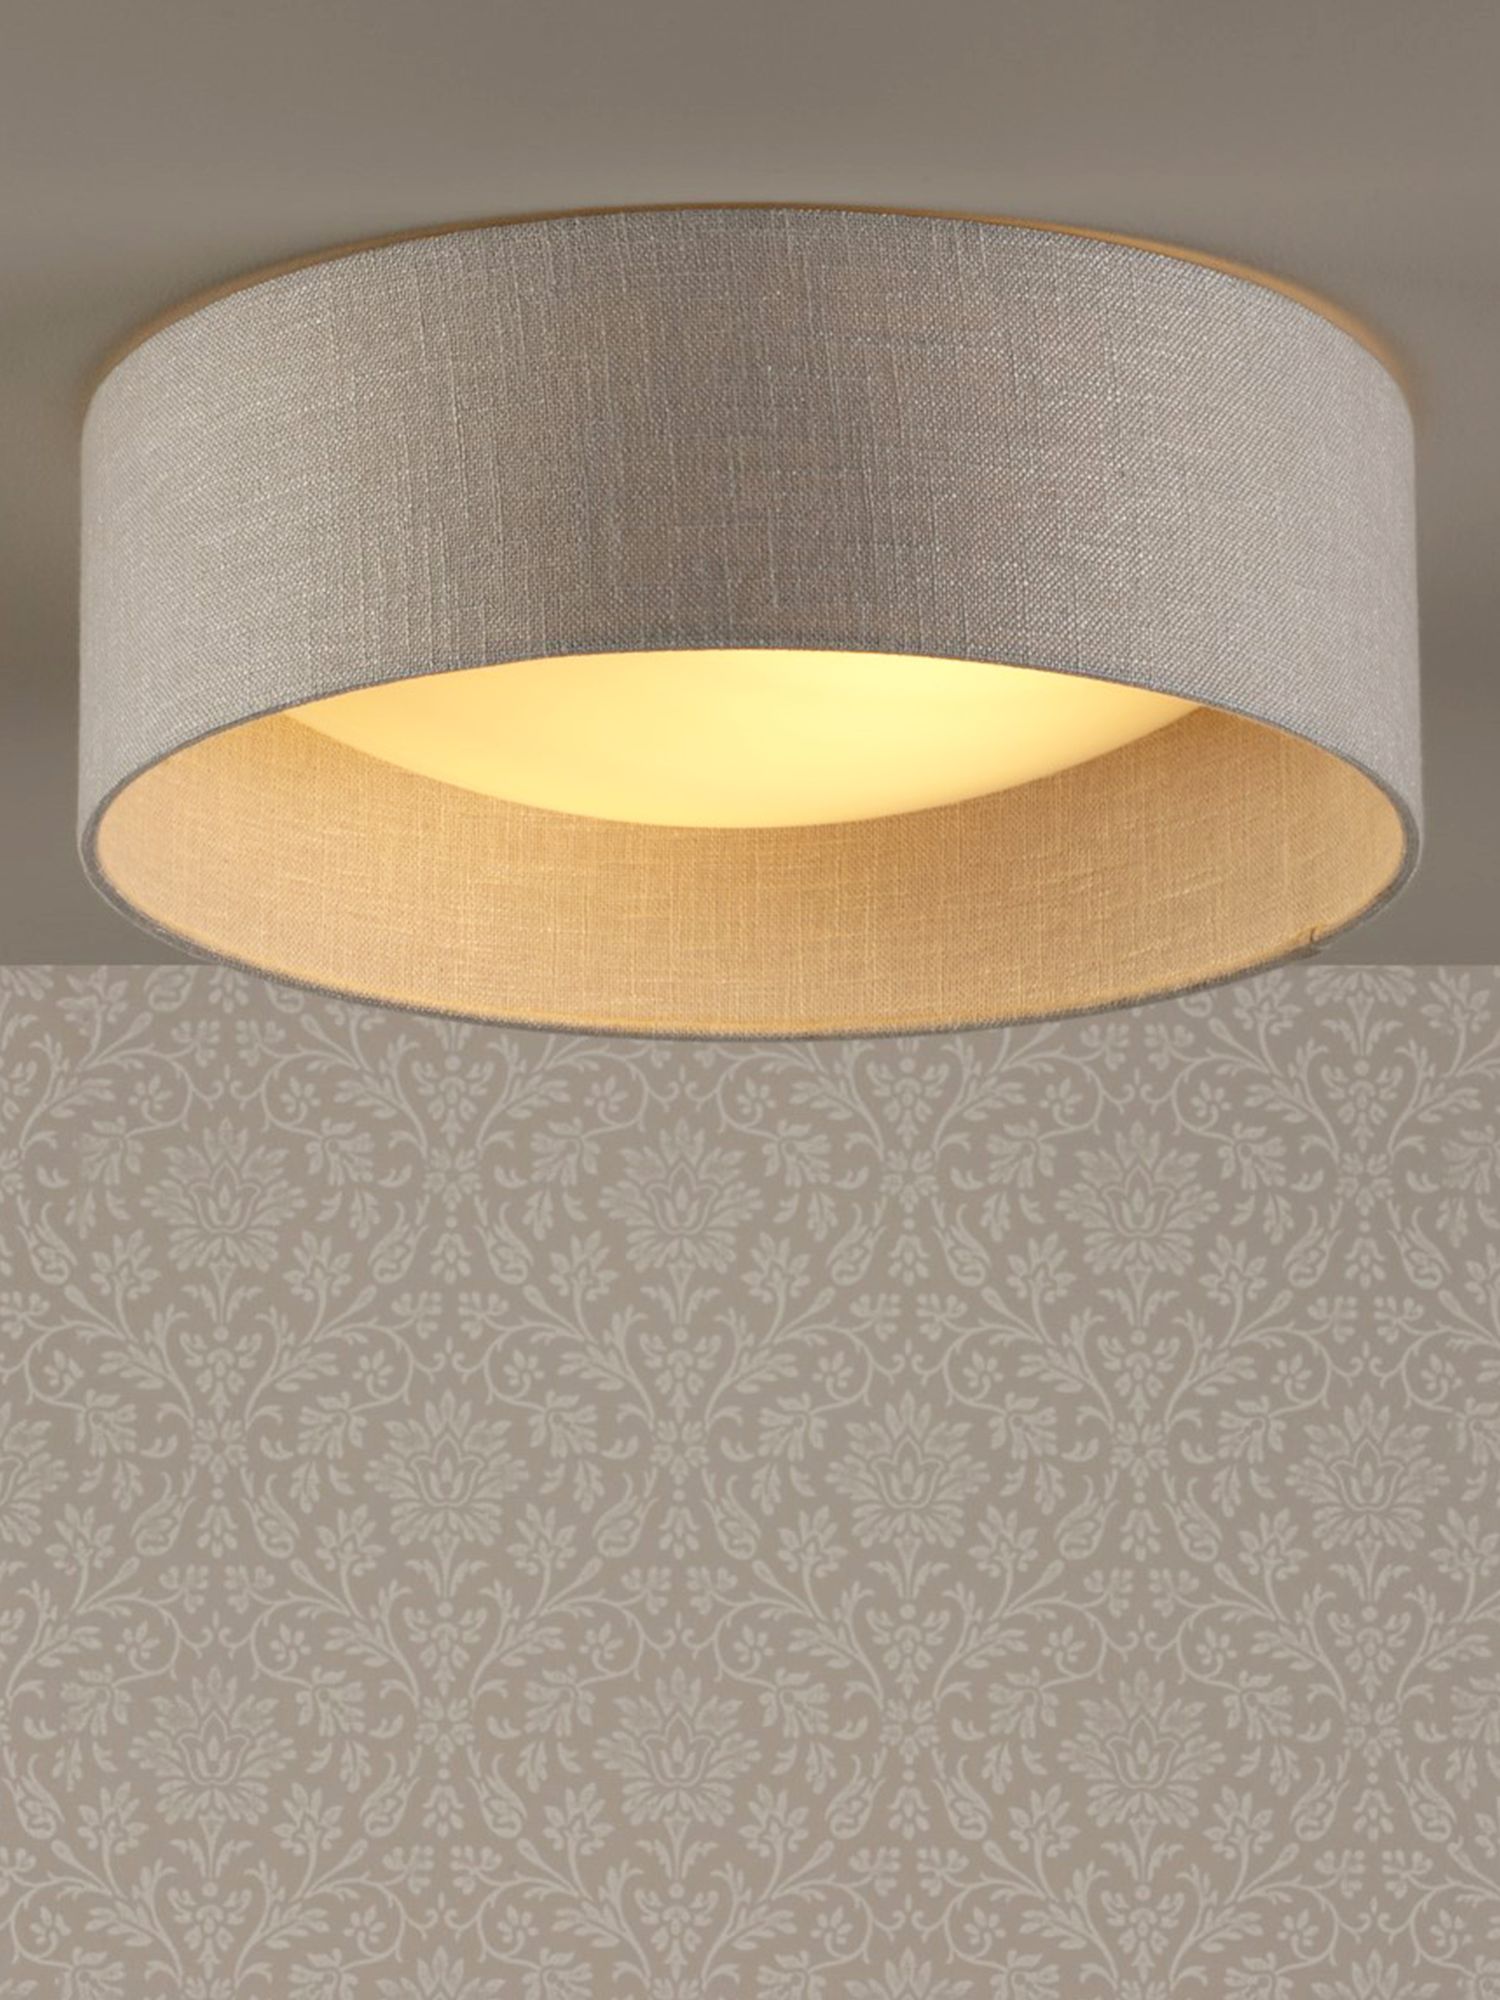 Photo of Laura ashley bacall linen concave flush ceiling light woven silver